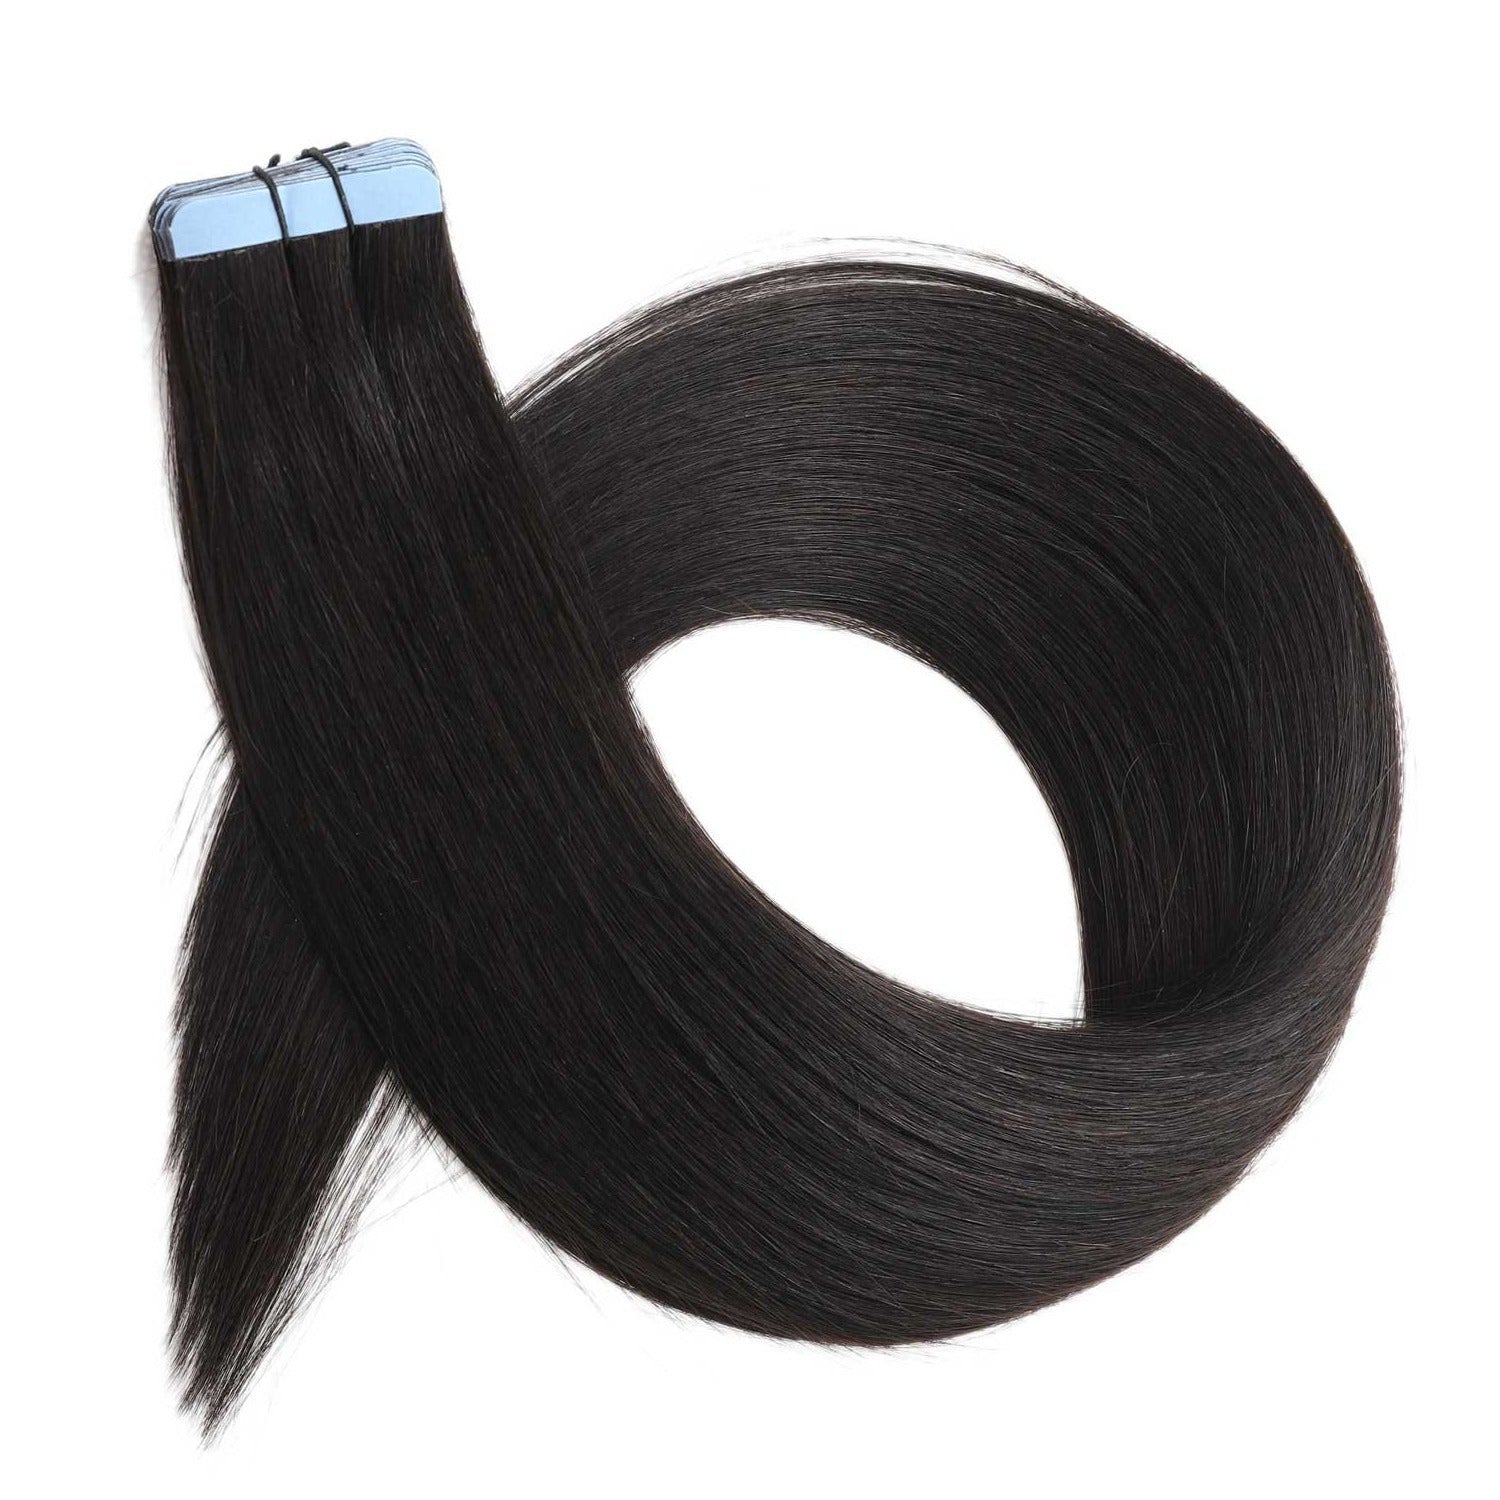 Sample Hair Extensions Colour Match #1c Midnight Brown